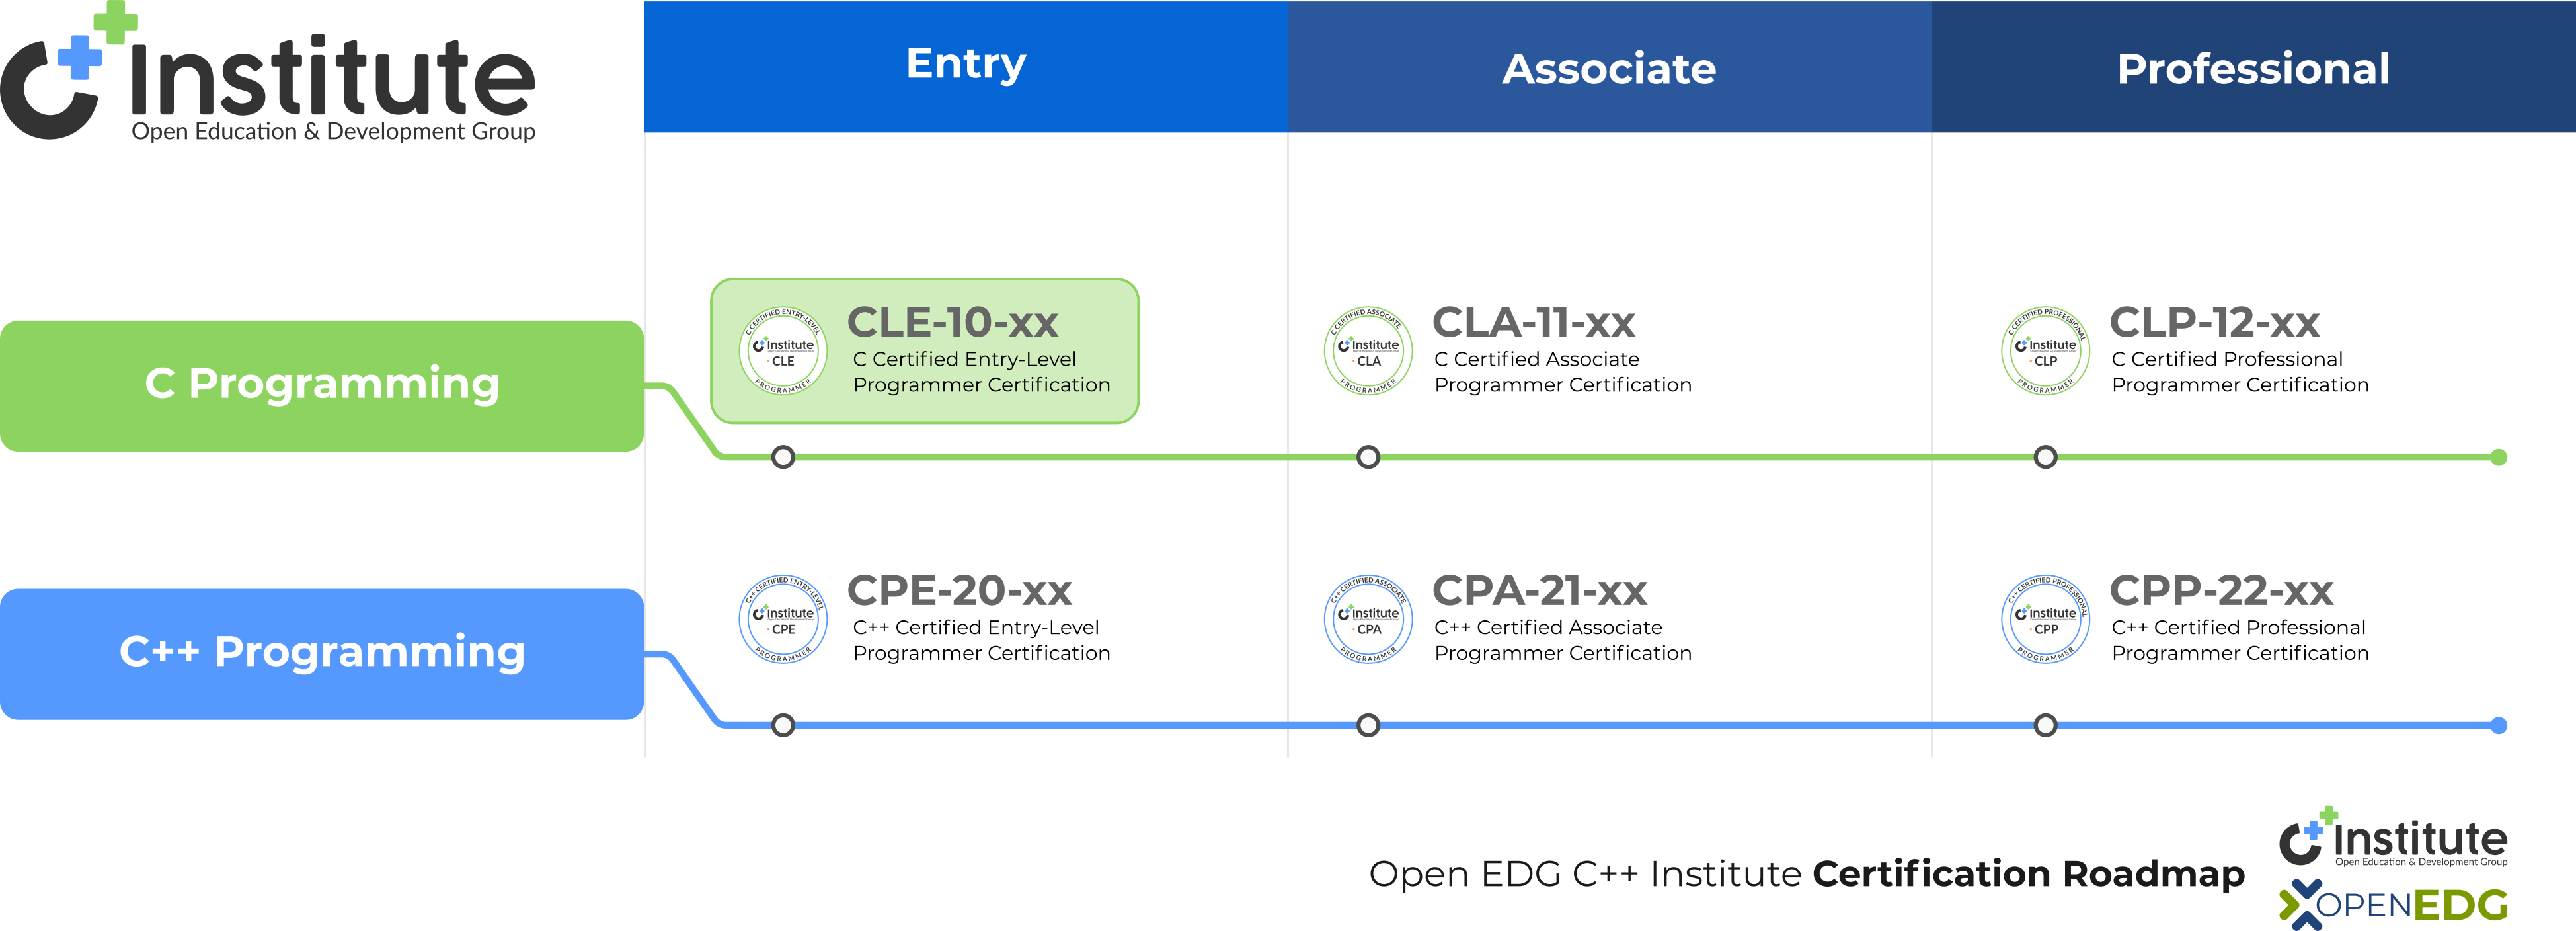 CLE exam on Certification Roadmap